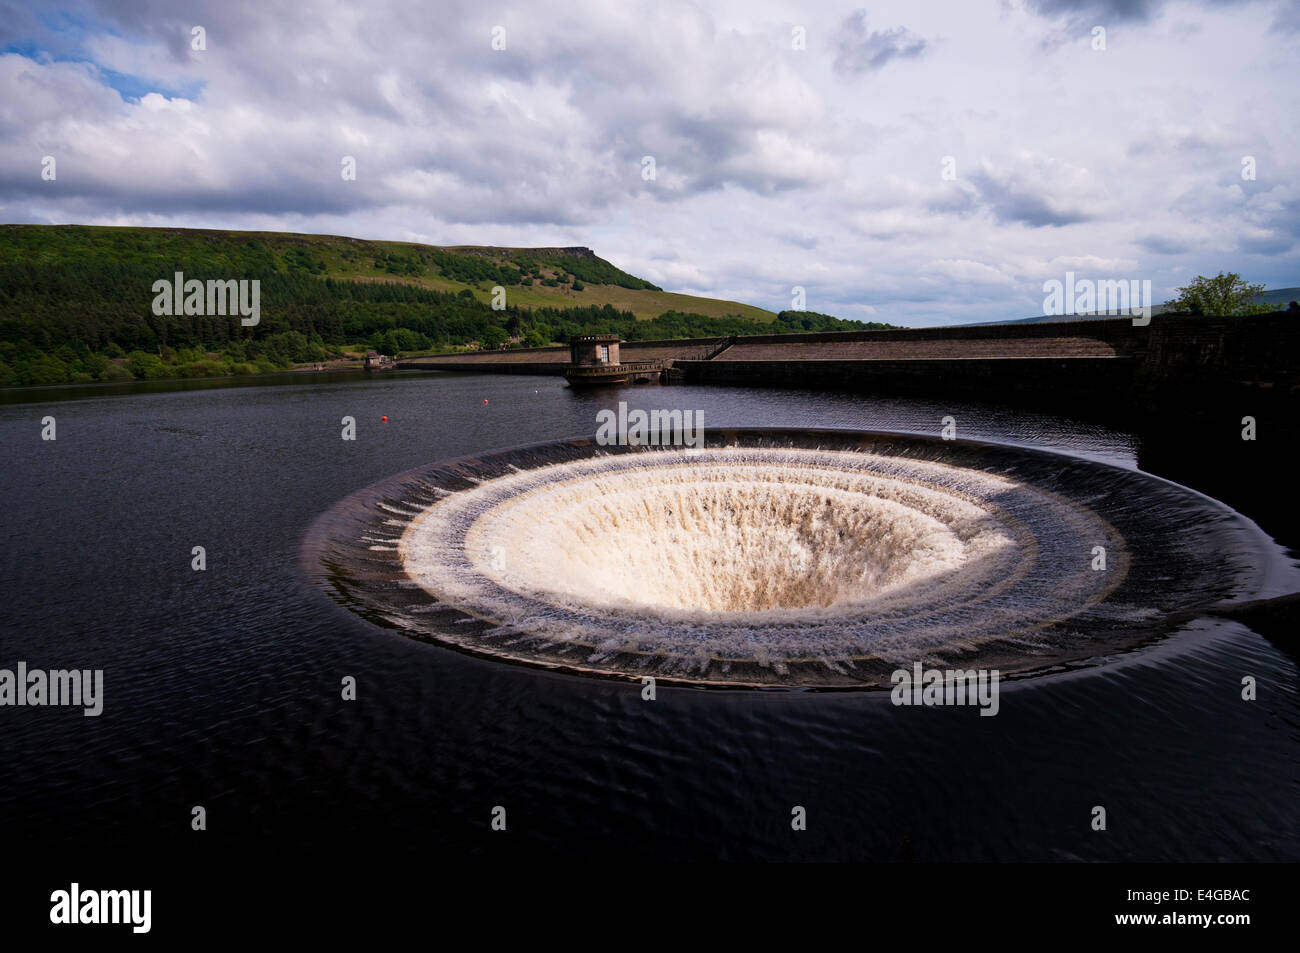 Overflow or Bellmouth, Ladybower Reservoir in the Peak District National Park. Stock Photo